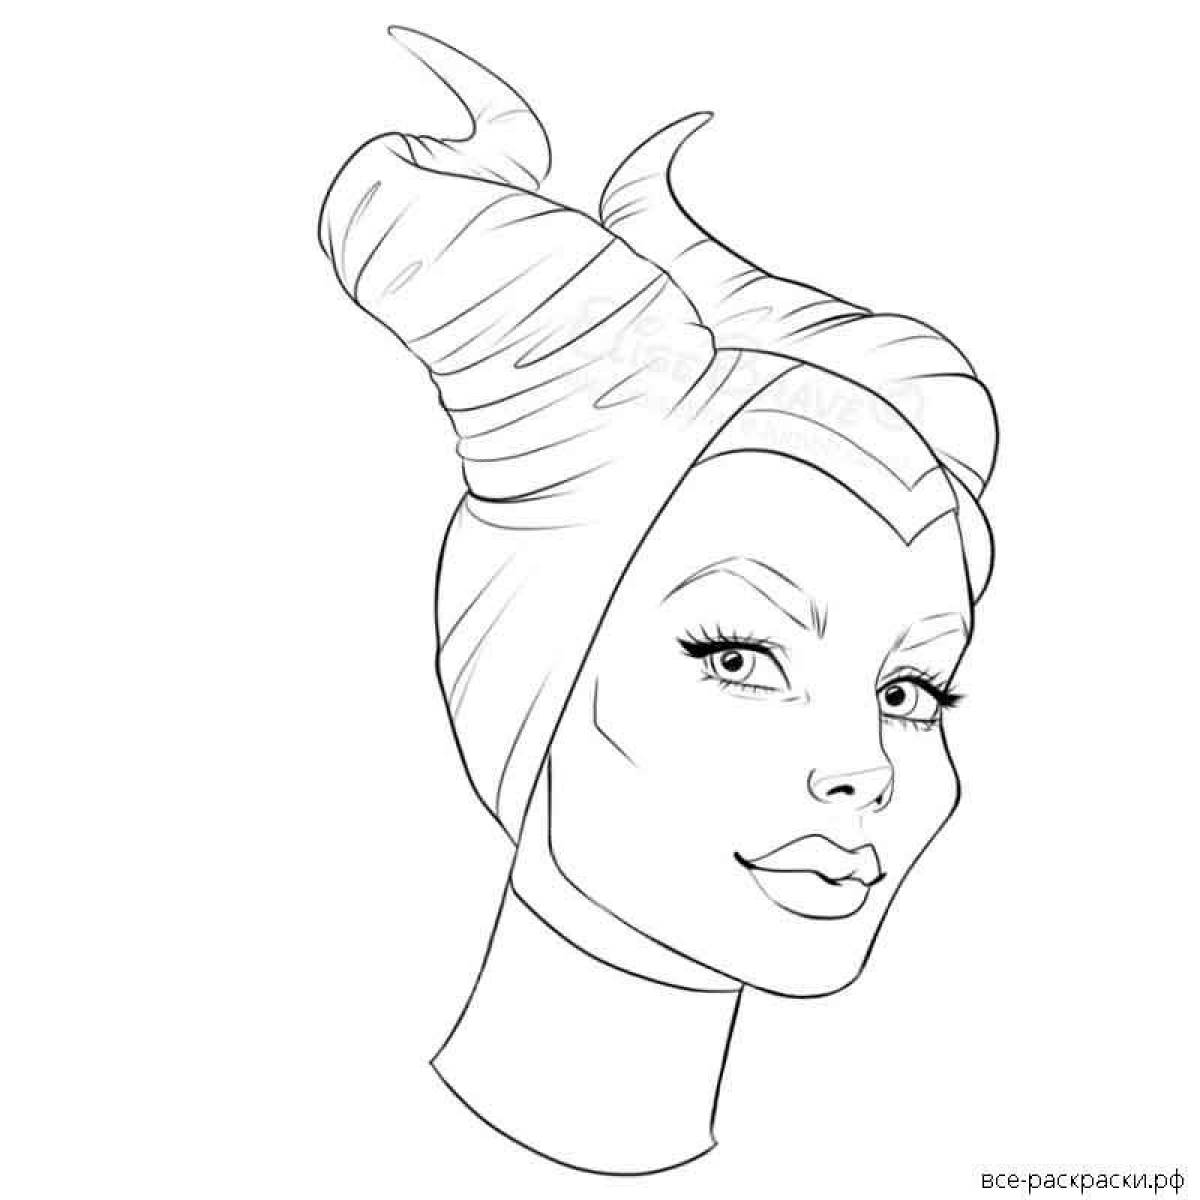 Amazing maleficent coloring book